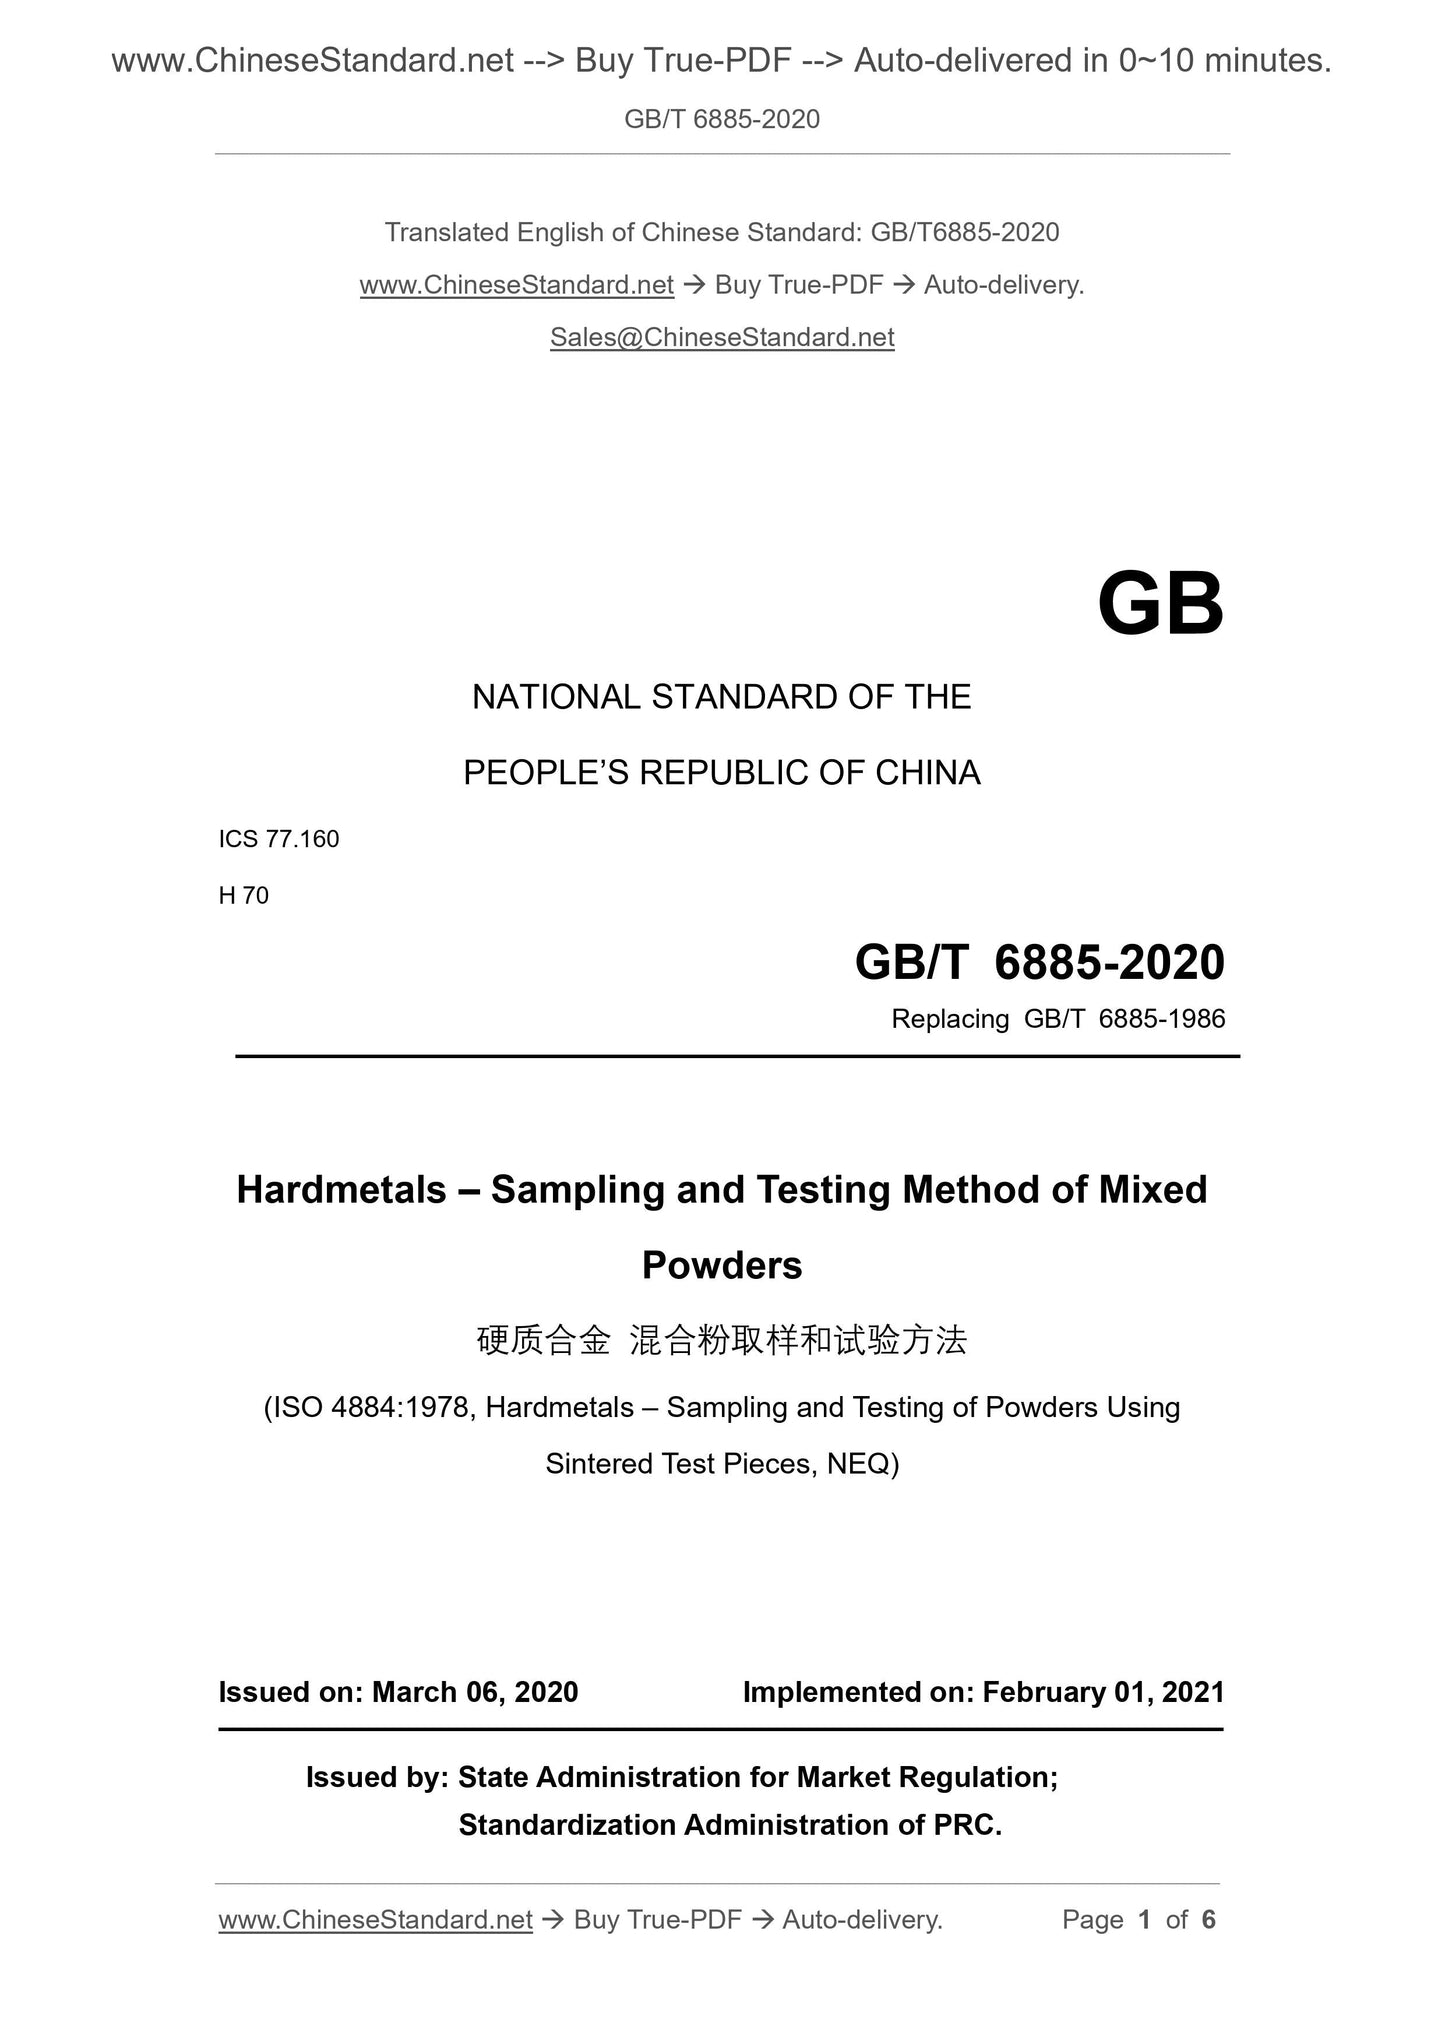 GB/T 6885-2020 Page 1